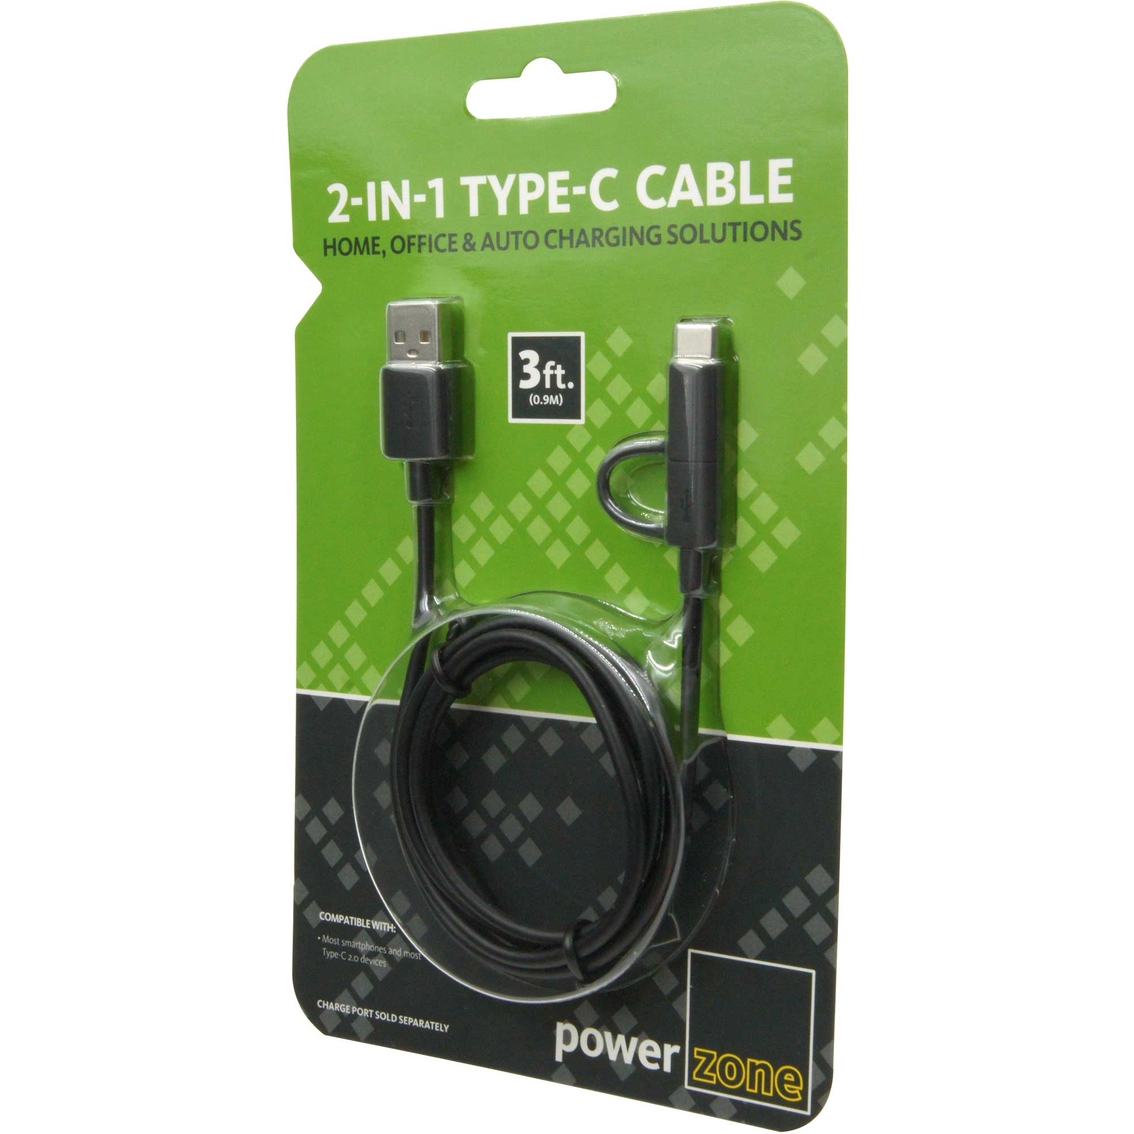 Powerzone 2-in-1 Type C Cable 3 ft. - Image 3 of 5